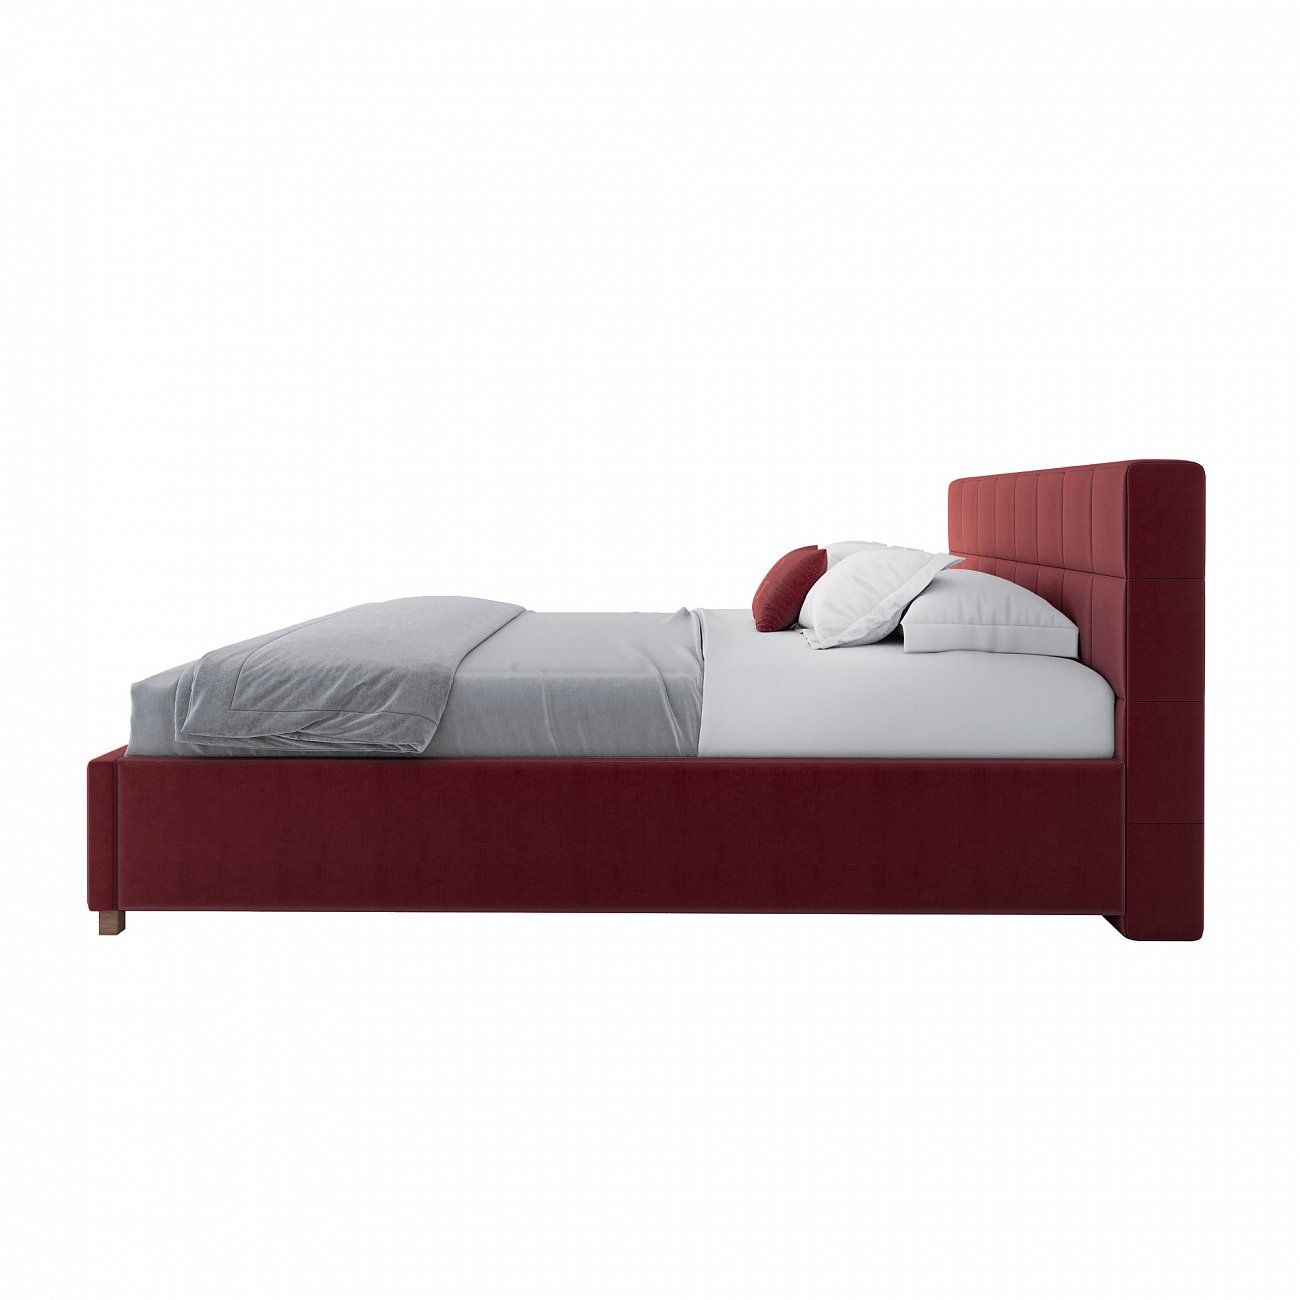 Double bed with upholstered headboard 180x200 cm red Wales